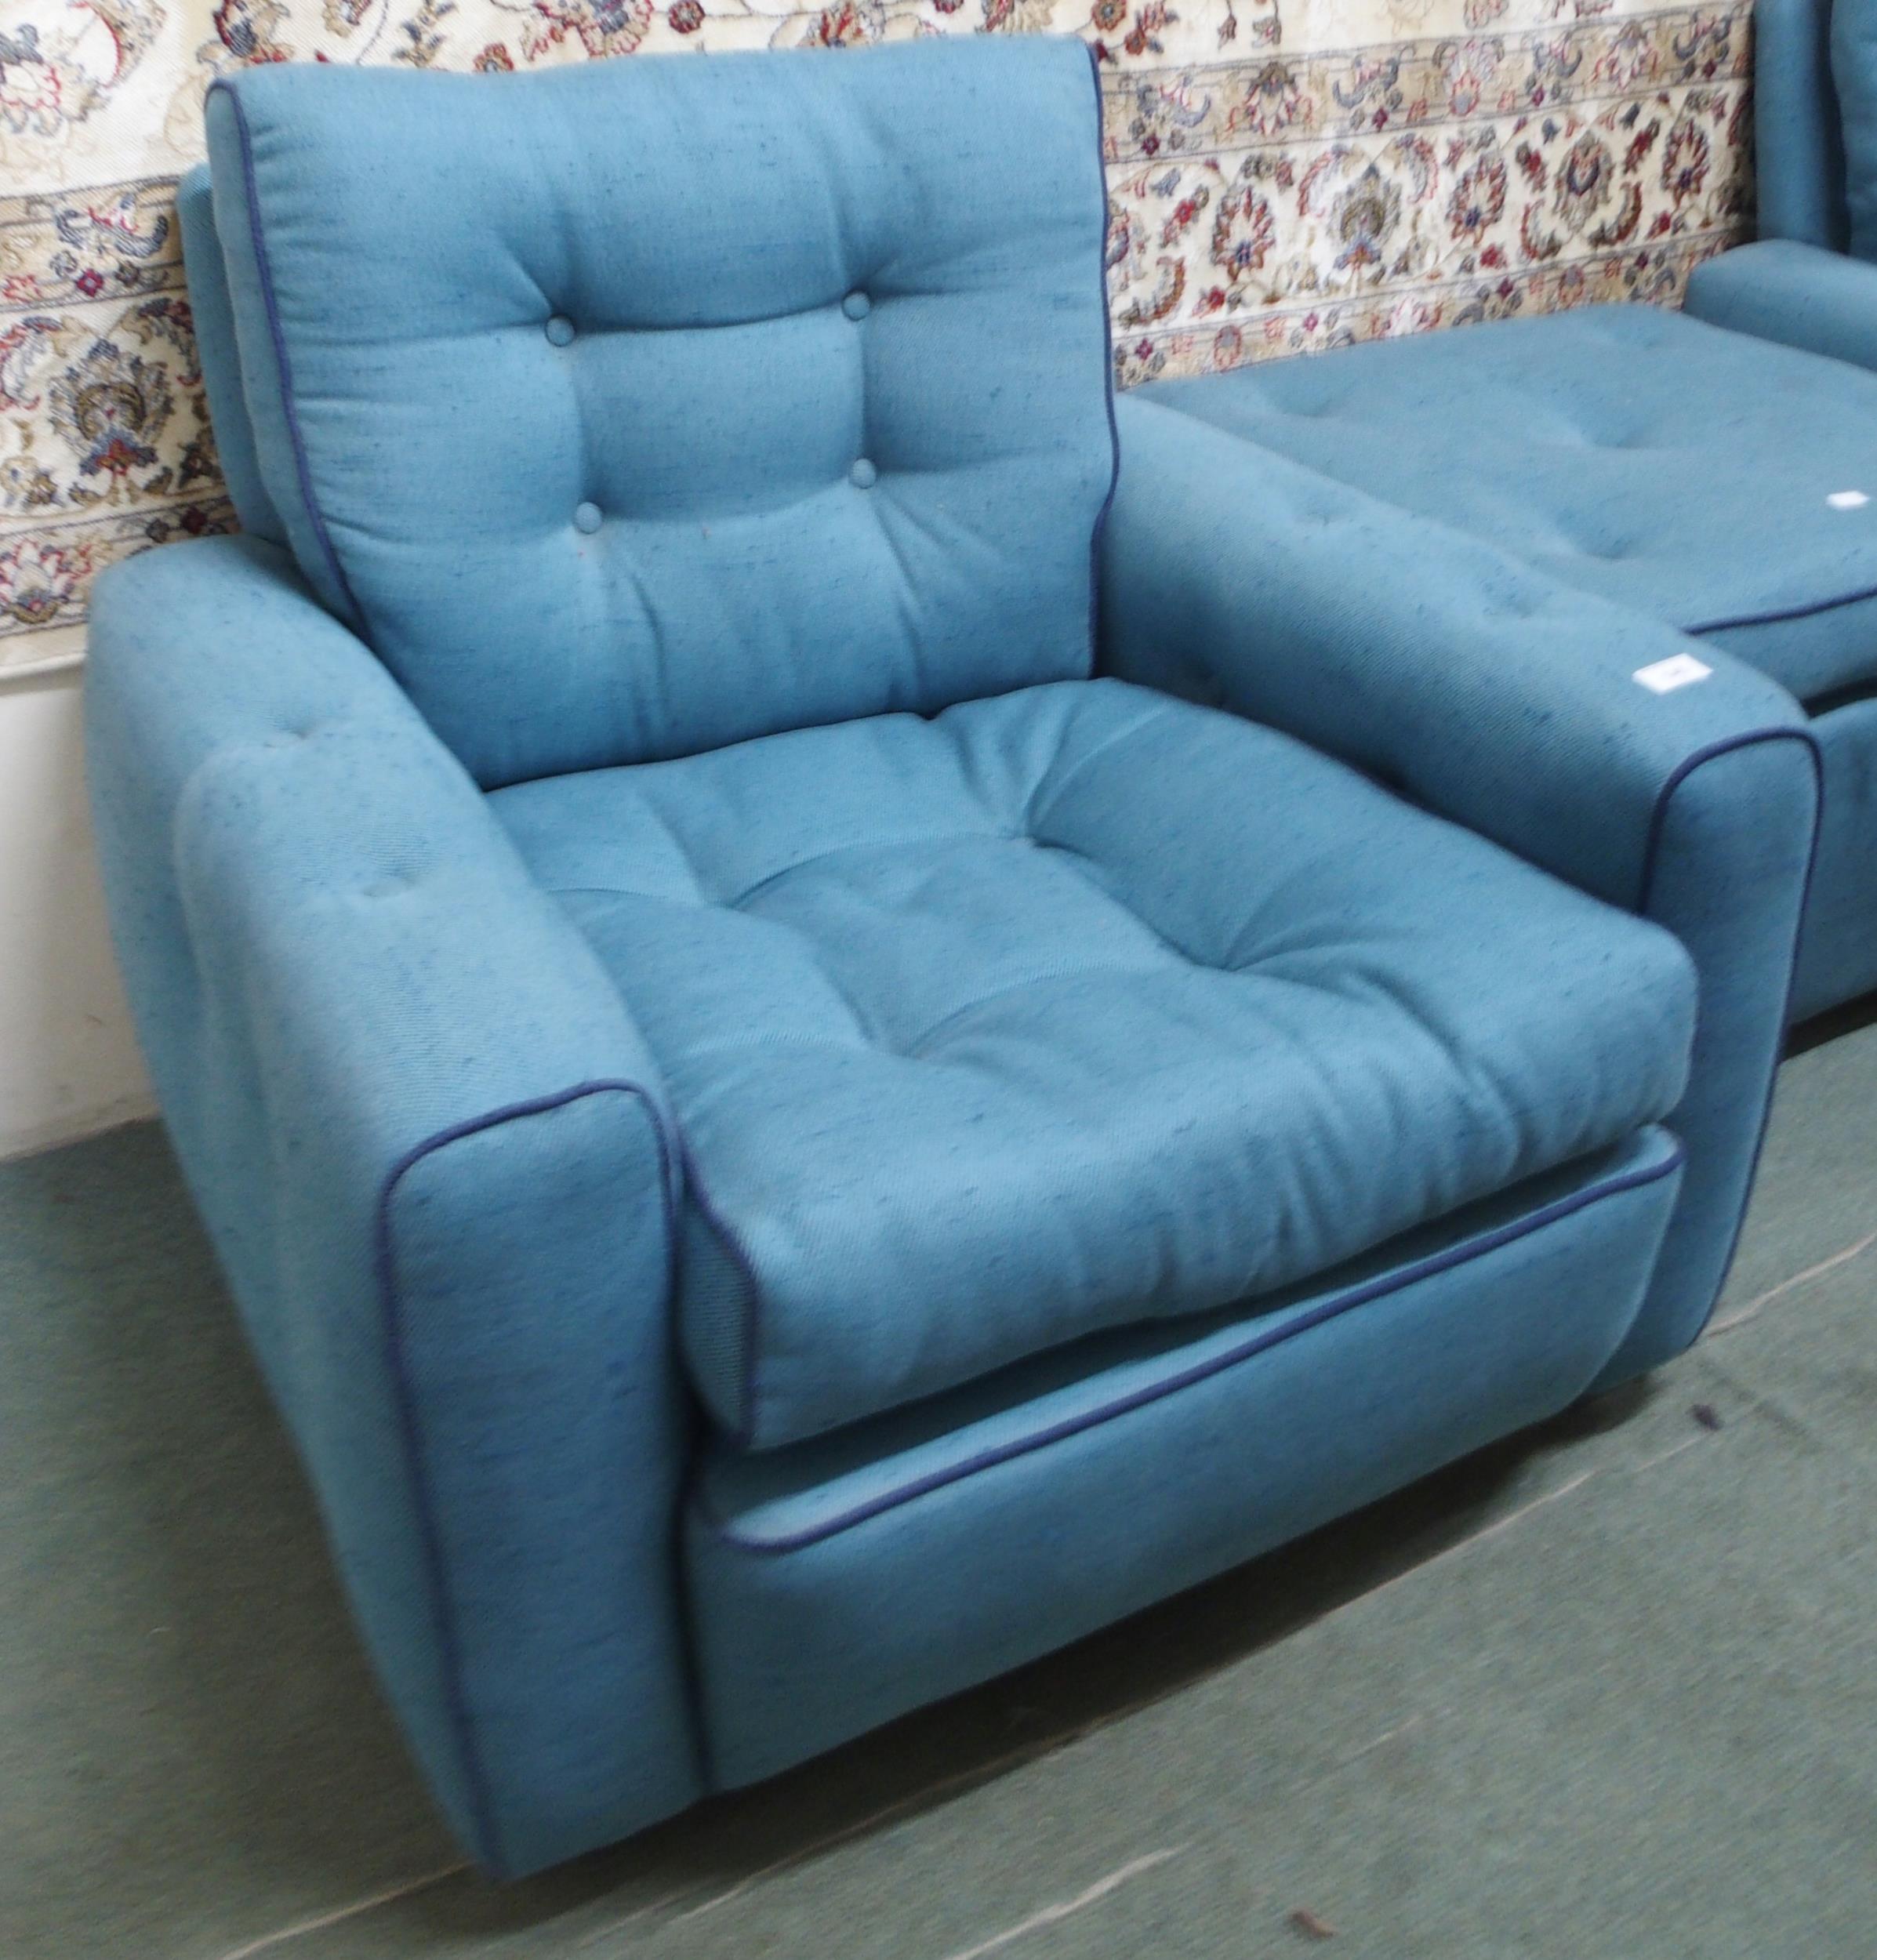 A pair of mid 20th century blue upholstered armchairs, 69cm high x 80cm wide x 73cm deep and an - Image 2 of 6